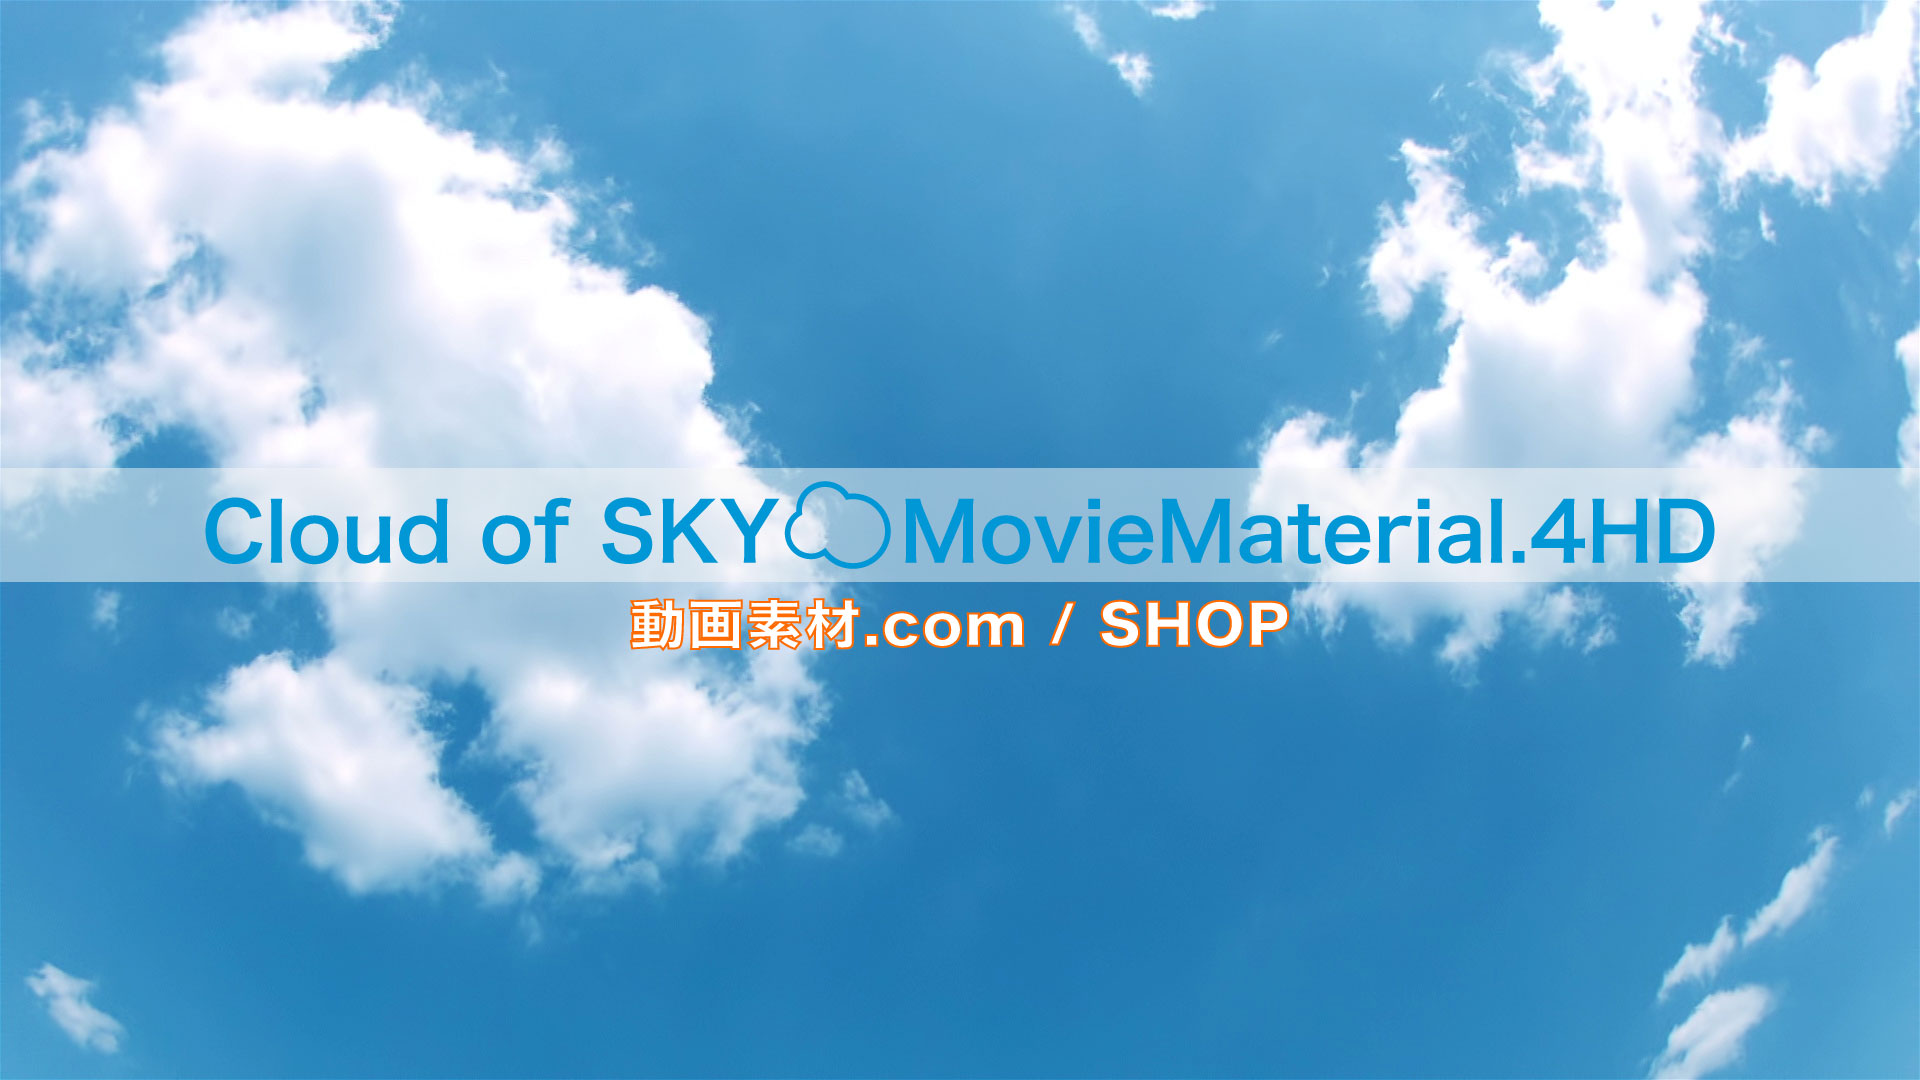 【Cloud of SKY MovieMaterial.HDSET】 ロイヤリティフリー フルハイビジョン動画素材集 Image.17